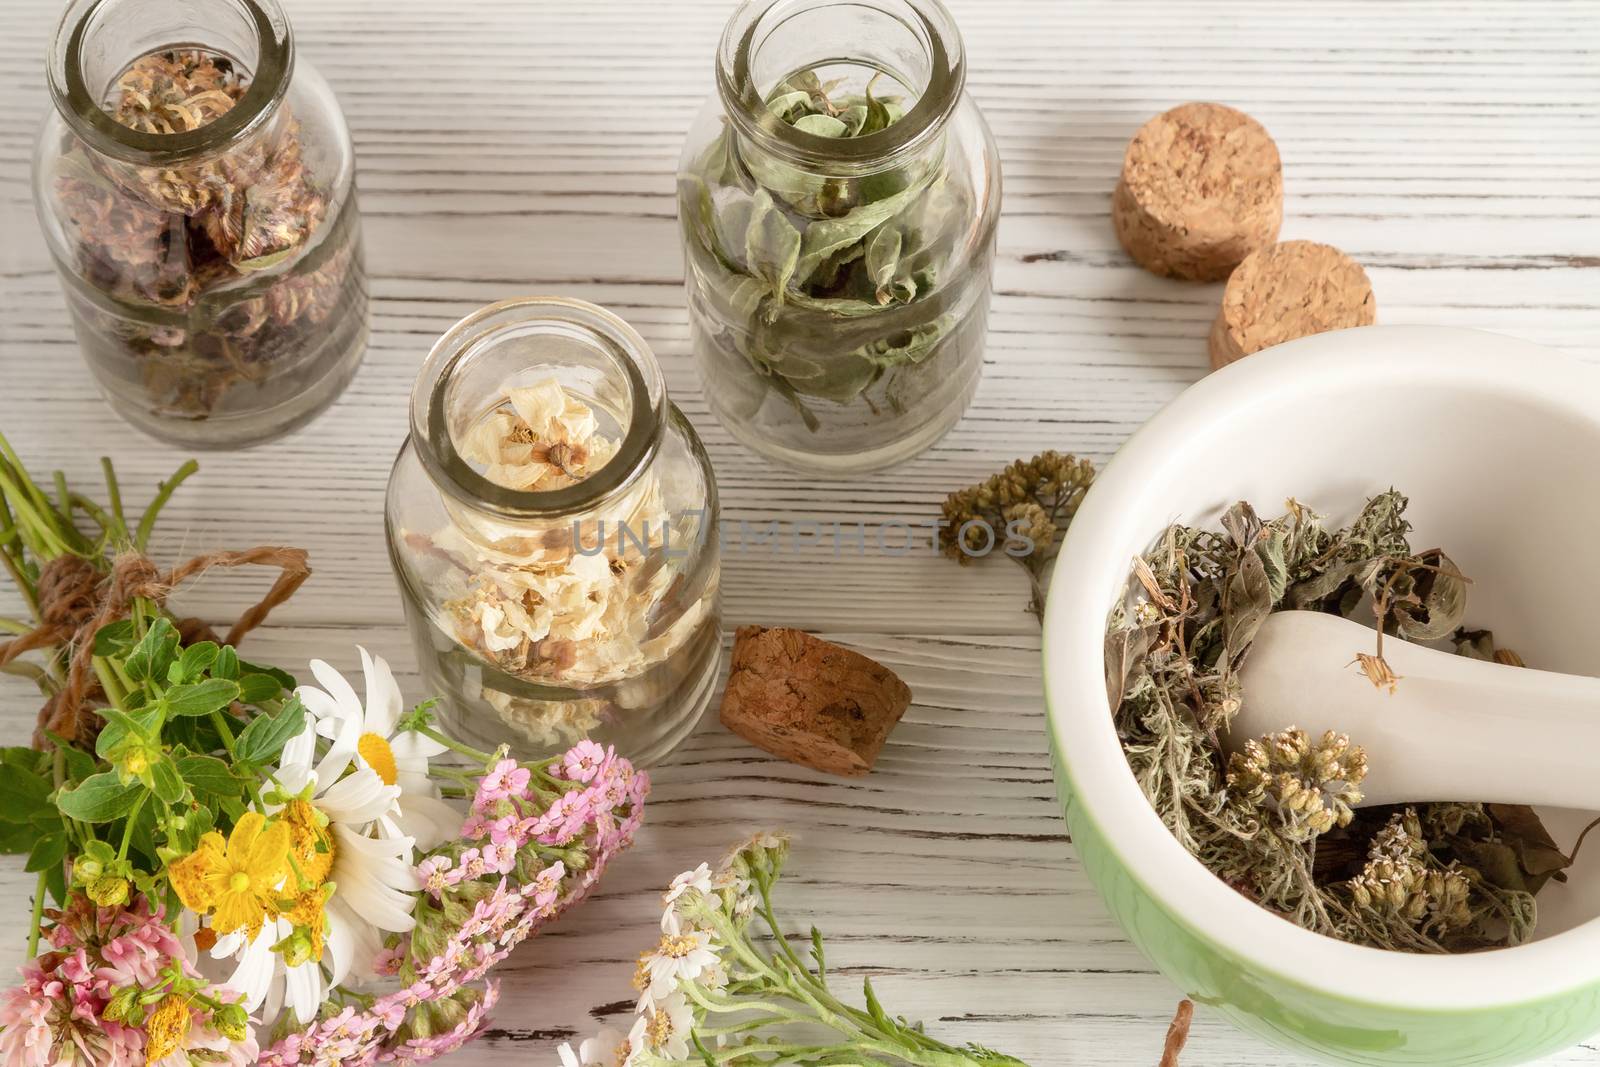 Drying and harvesting of medicinal herbs, homeopathy and alternative medicine concept by galsand